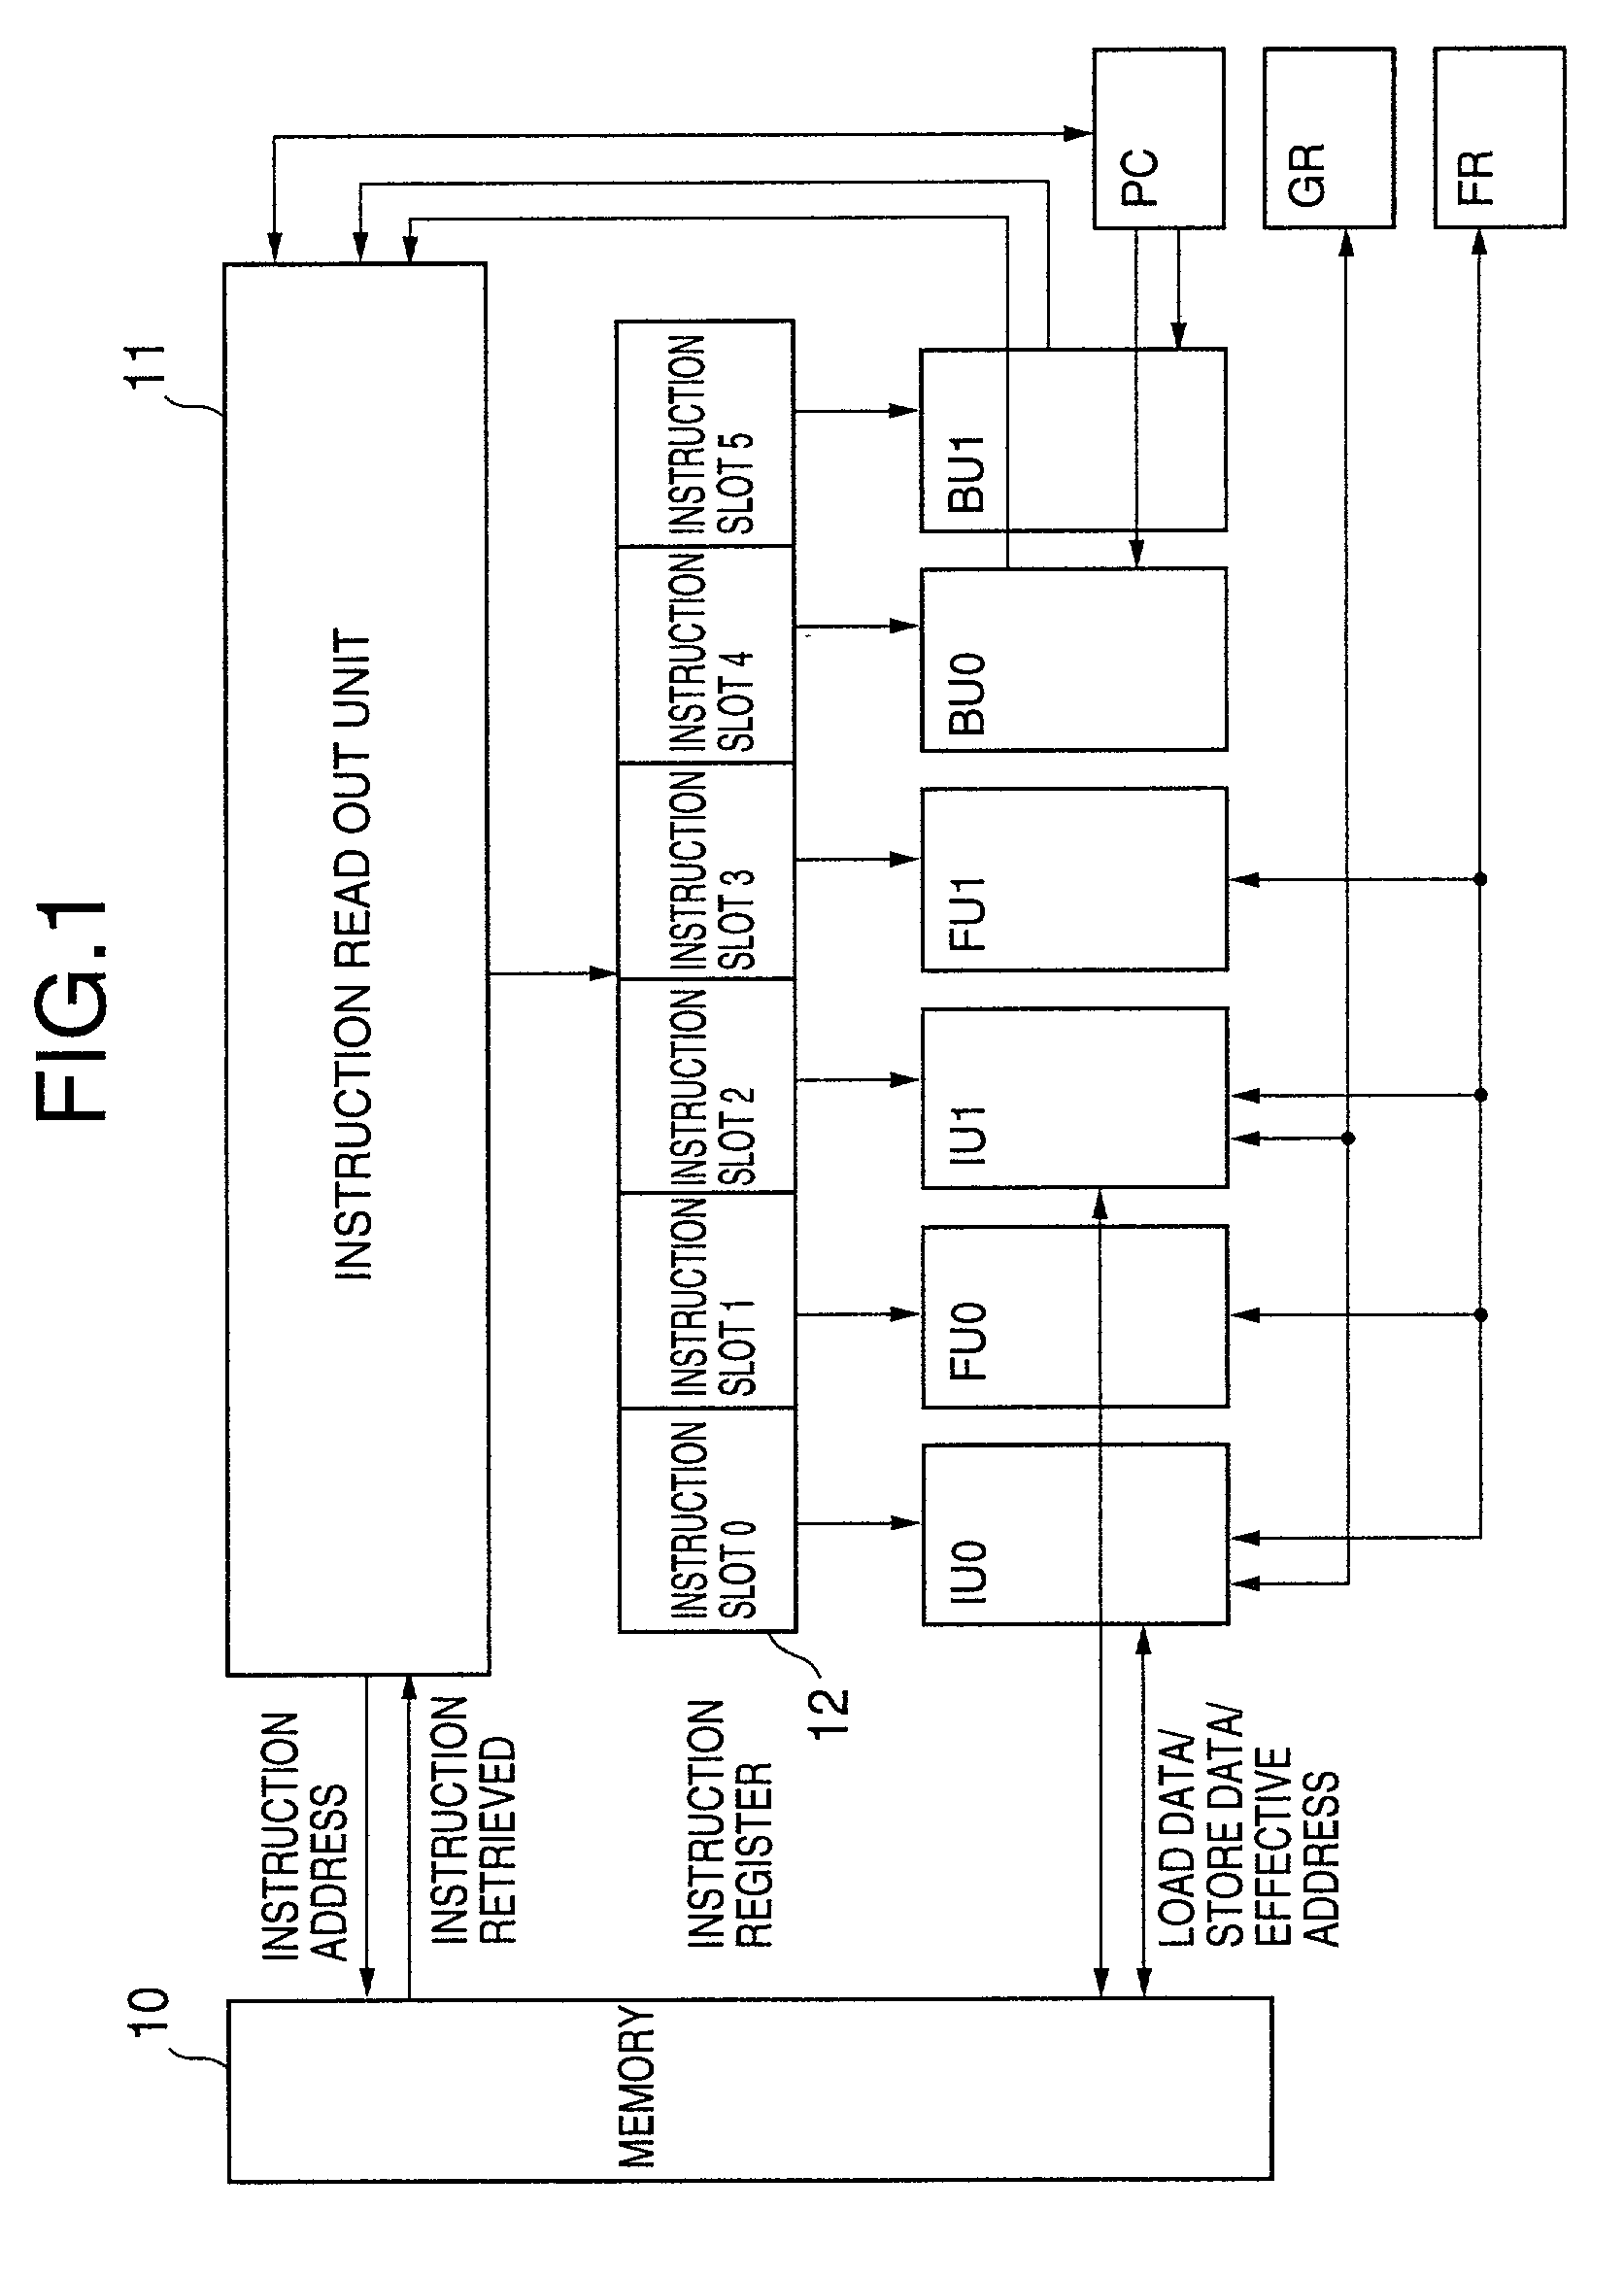 Instruction processing method for verifying basic instruction arrangement in VLIW instruction for variable length VLIW processor